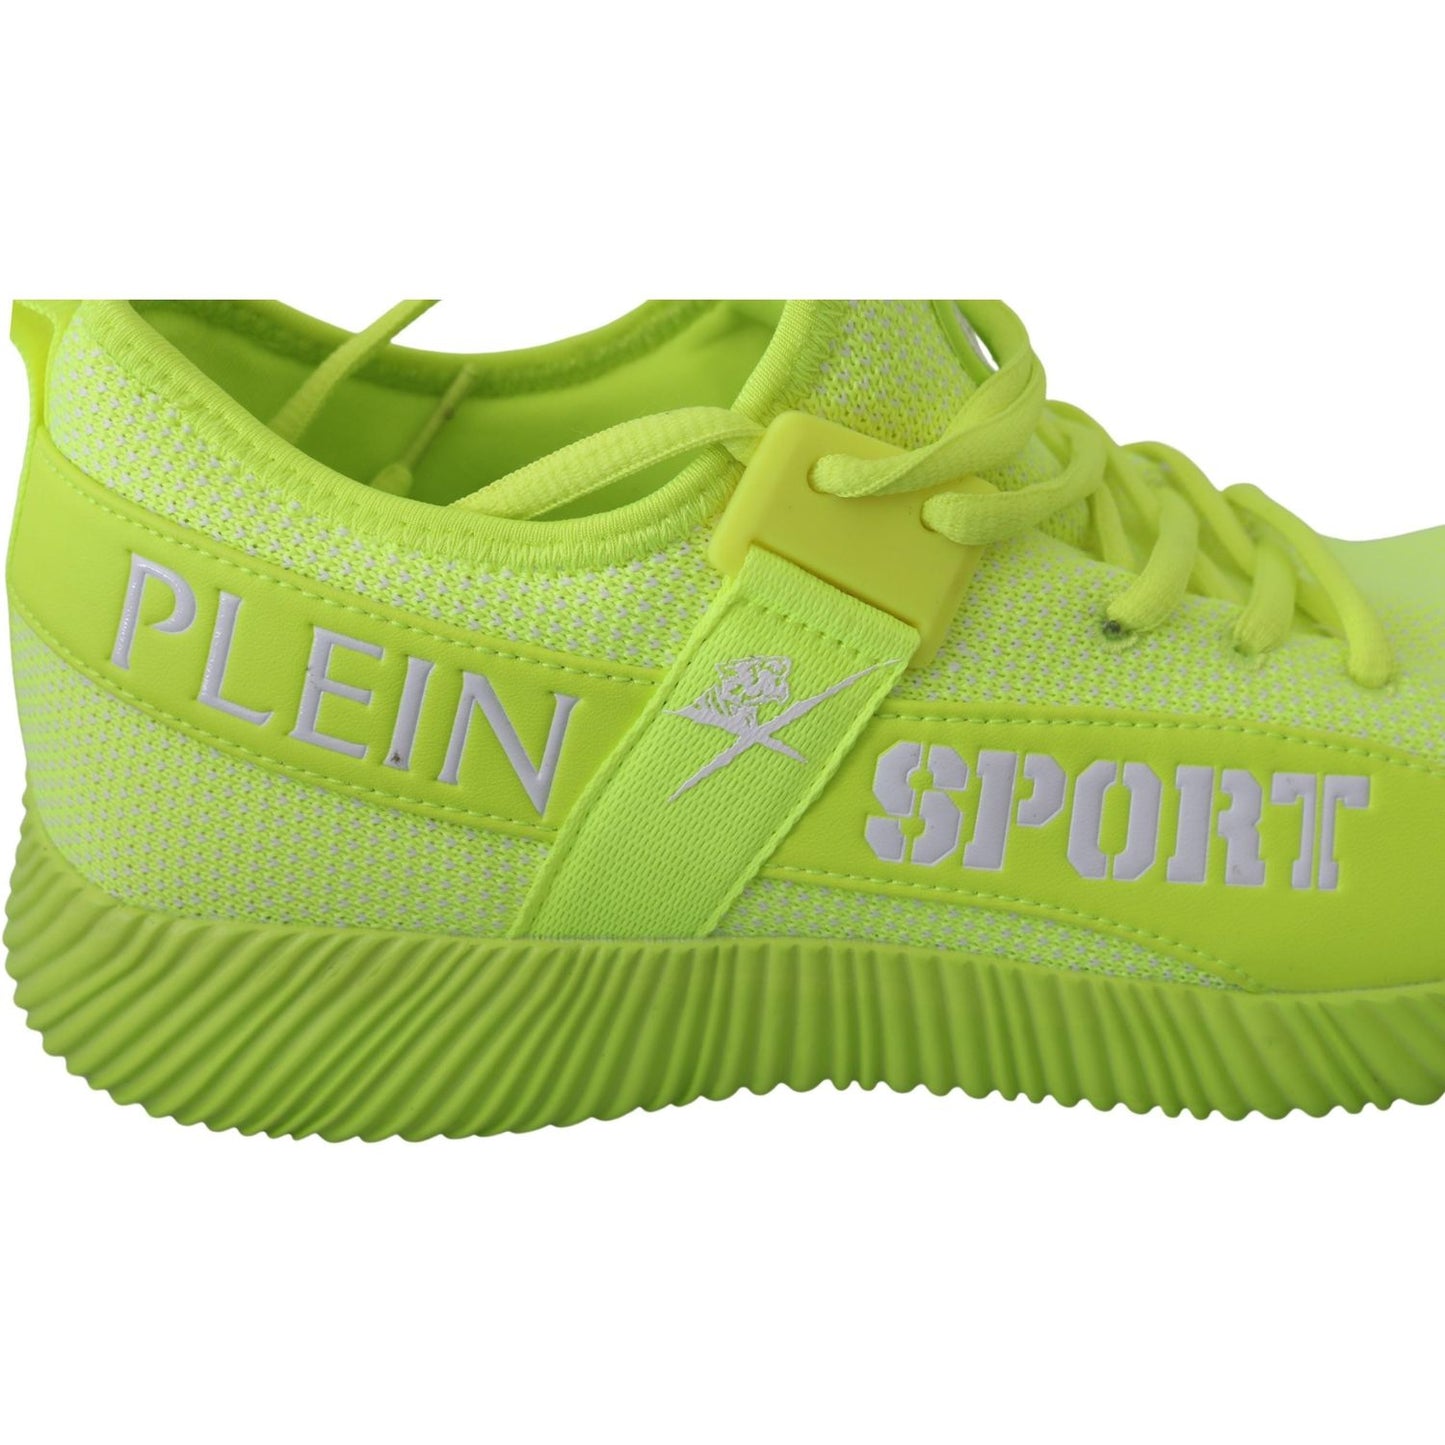 Philipp Plein Stylish Light Green Casual Sneakers MAN SNEAKERS green-carter-logo-hi-top-sneakers-shoes IMG_7552-scaled-d138abc4-84c.jpg